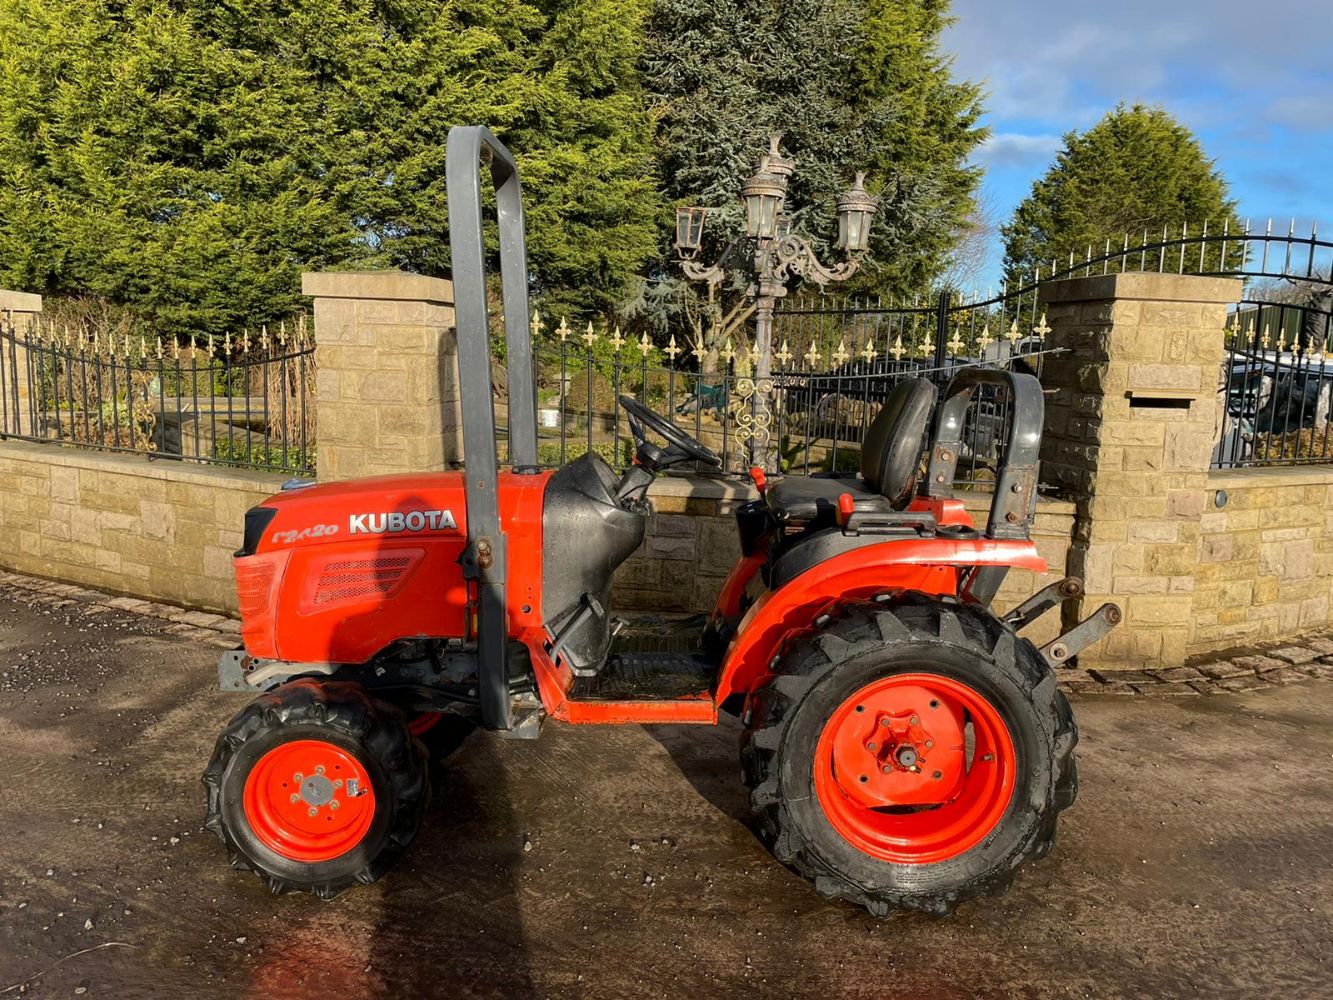 KUBOTA B2420 COMPACT TRACTOR, NEW CHAINSAW, TAKEUCHI MINI DIGGER, 9CT GOLD CUBAN LINK BRACELET, YAMAHA R6 BIKE & MORE Ending TUESDAY FROM 7PM